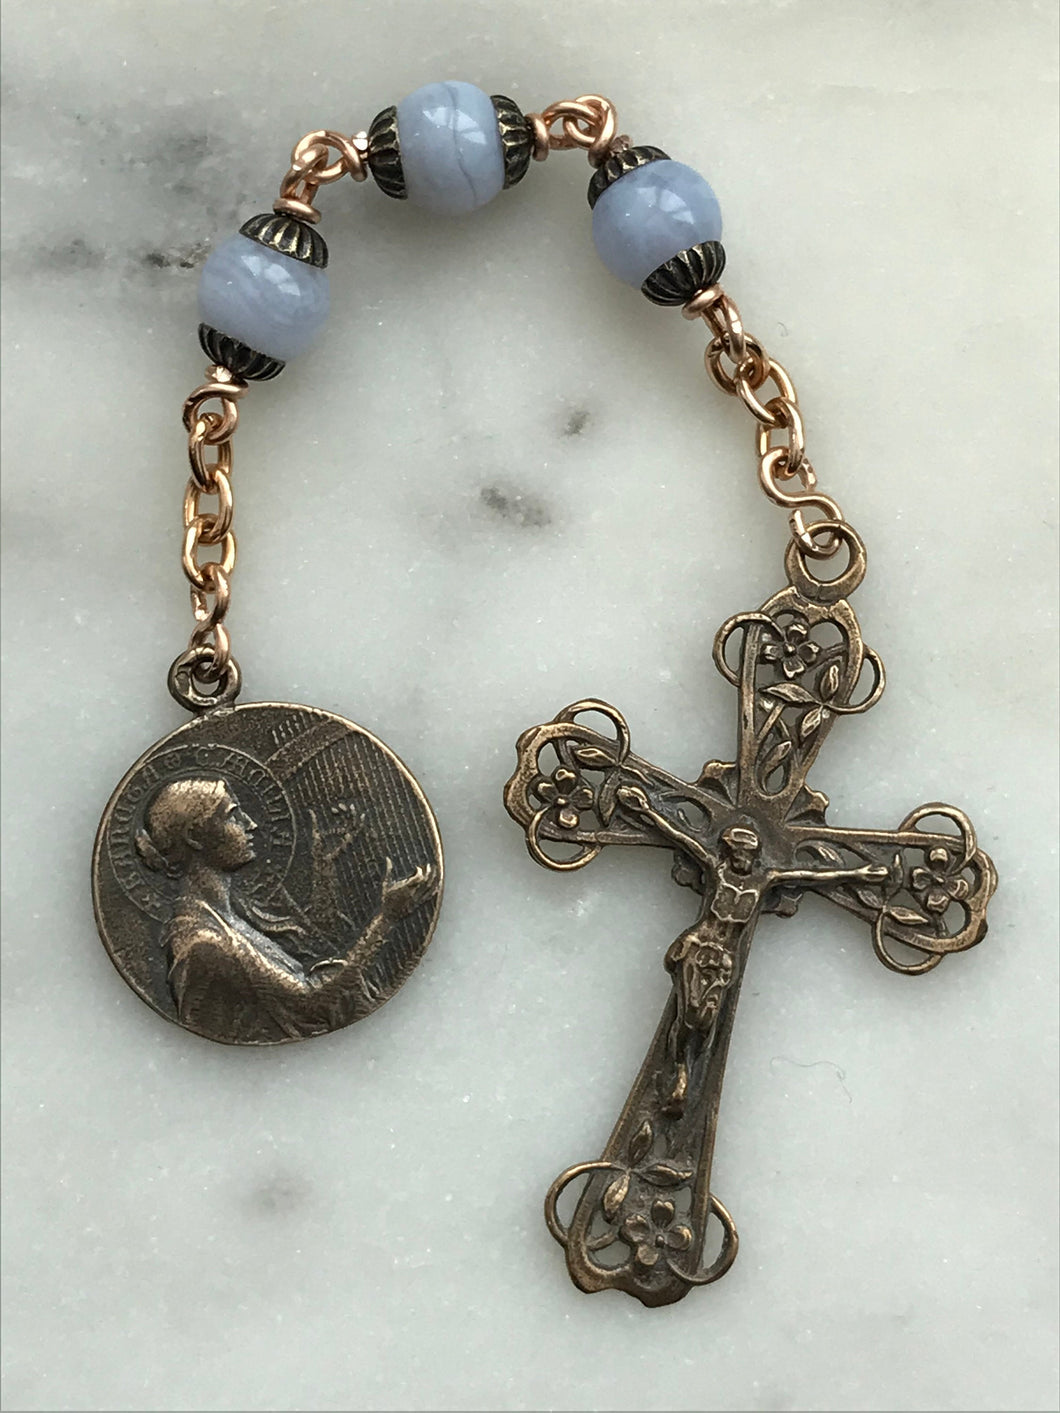 St. Cecilia Chaplet - Blue Lace Agate and Bronze Rosary